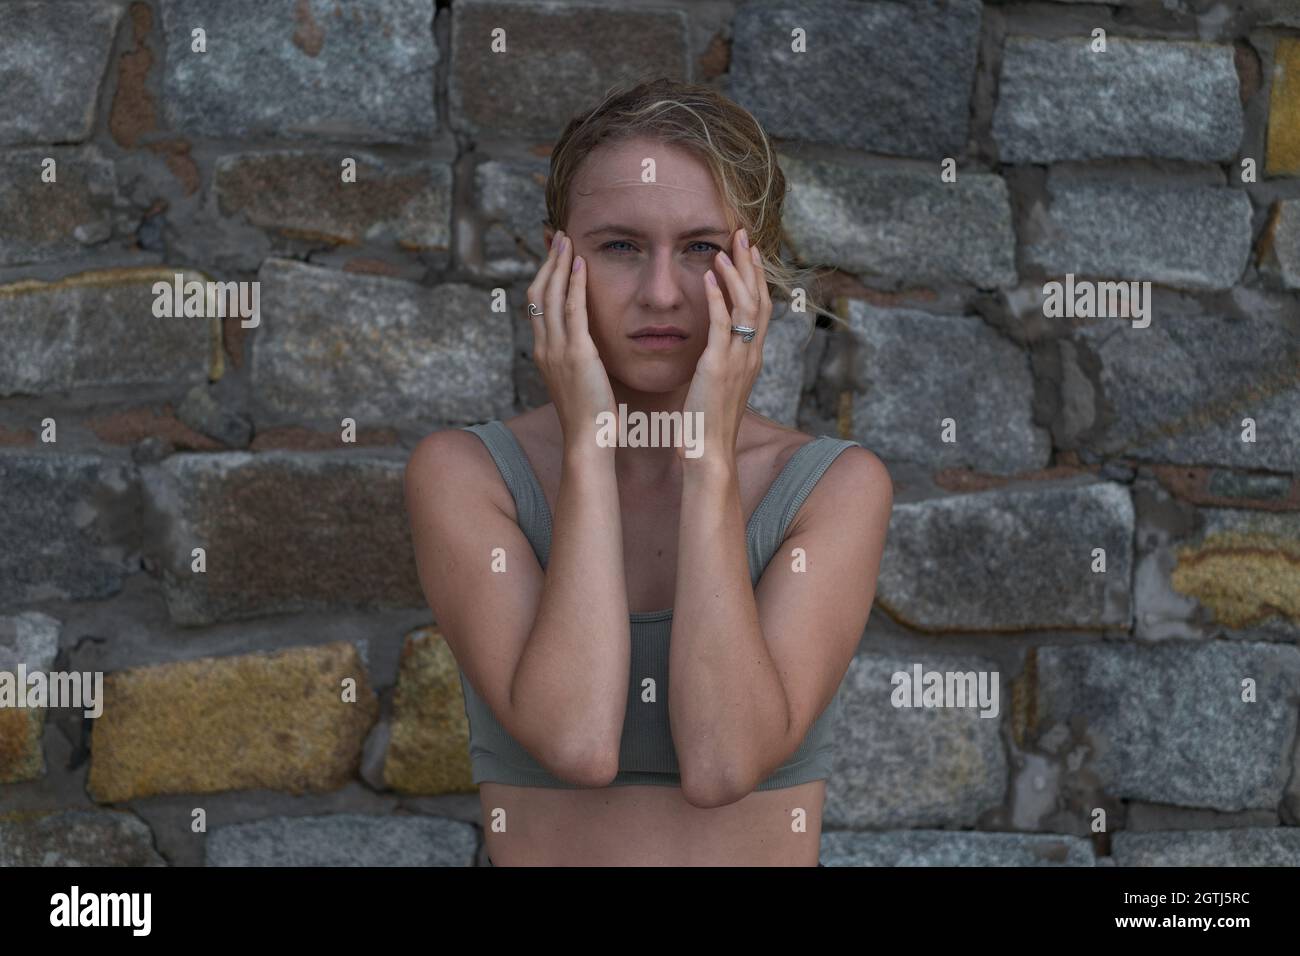 Sad stressful face of young caucasian blonde woman in crop top on the stone background. Young woman crying and using hands to cover face. Stock Photo